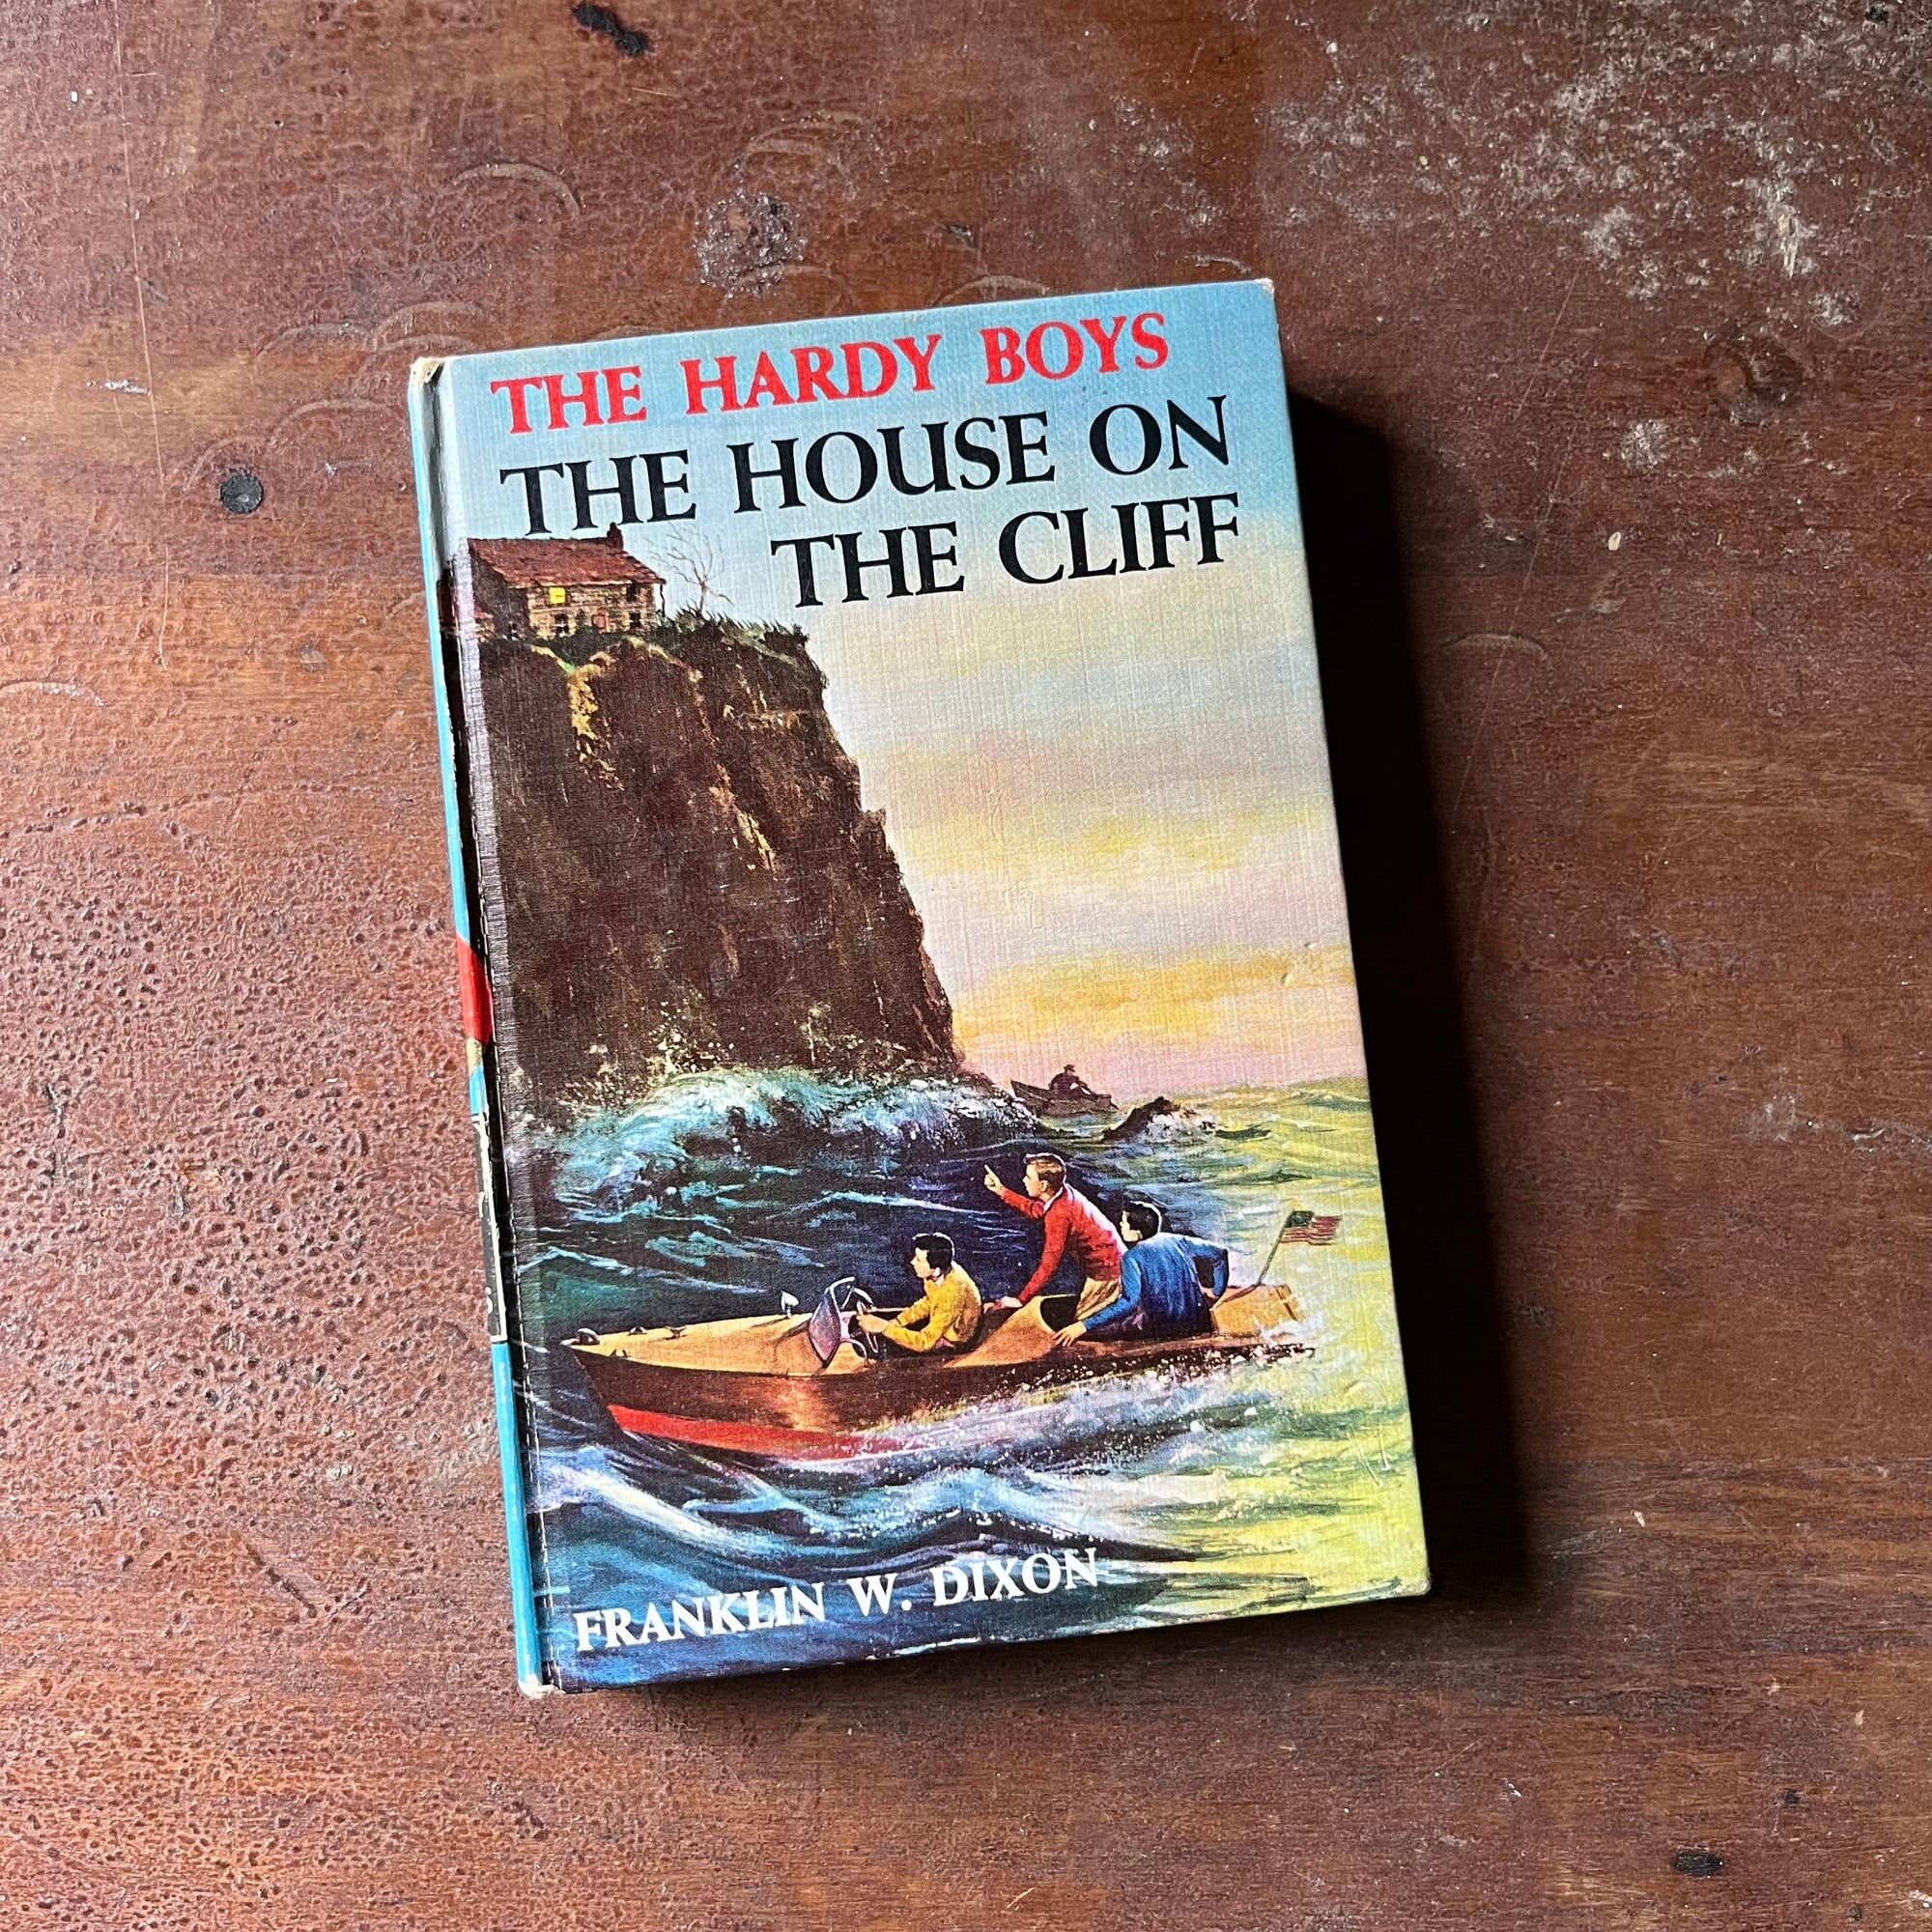 vintage children's chapter book, vintage adventure book for boys, The Hardy Boys Mystery Series Book - The Hardy Boys #2:  The House on the Cliff written by Franklin W. Dixon - view of the front cover with the boys in a boat looking up at the house on the cliff